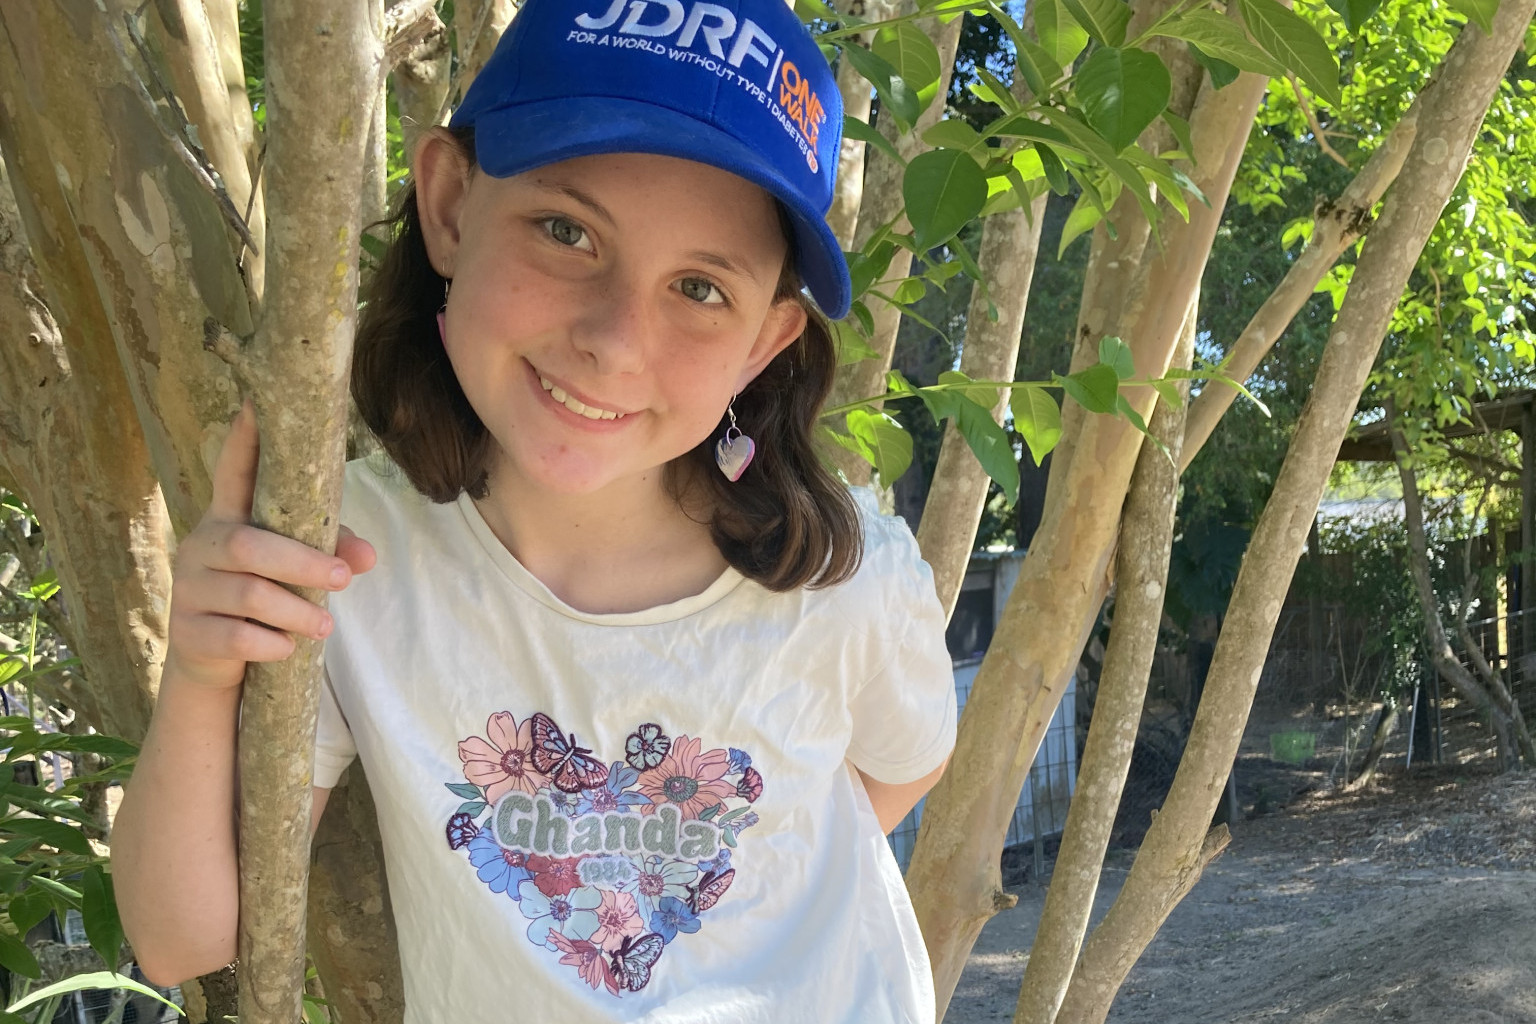 Woodford resident Charlotte Collins is keen to find a cure for Type 1 Diabetes, and is welcoming people to take part in Monday’s community event in Woodford.